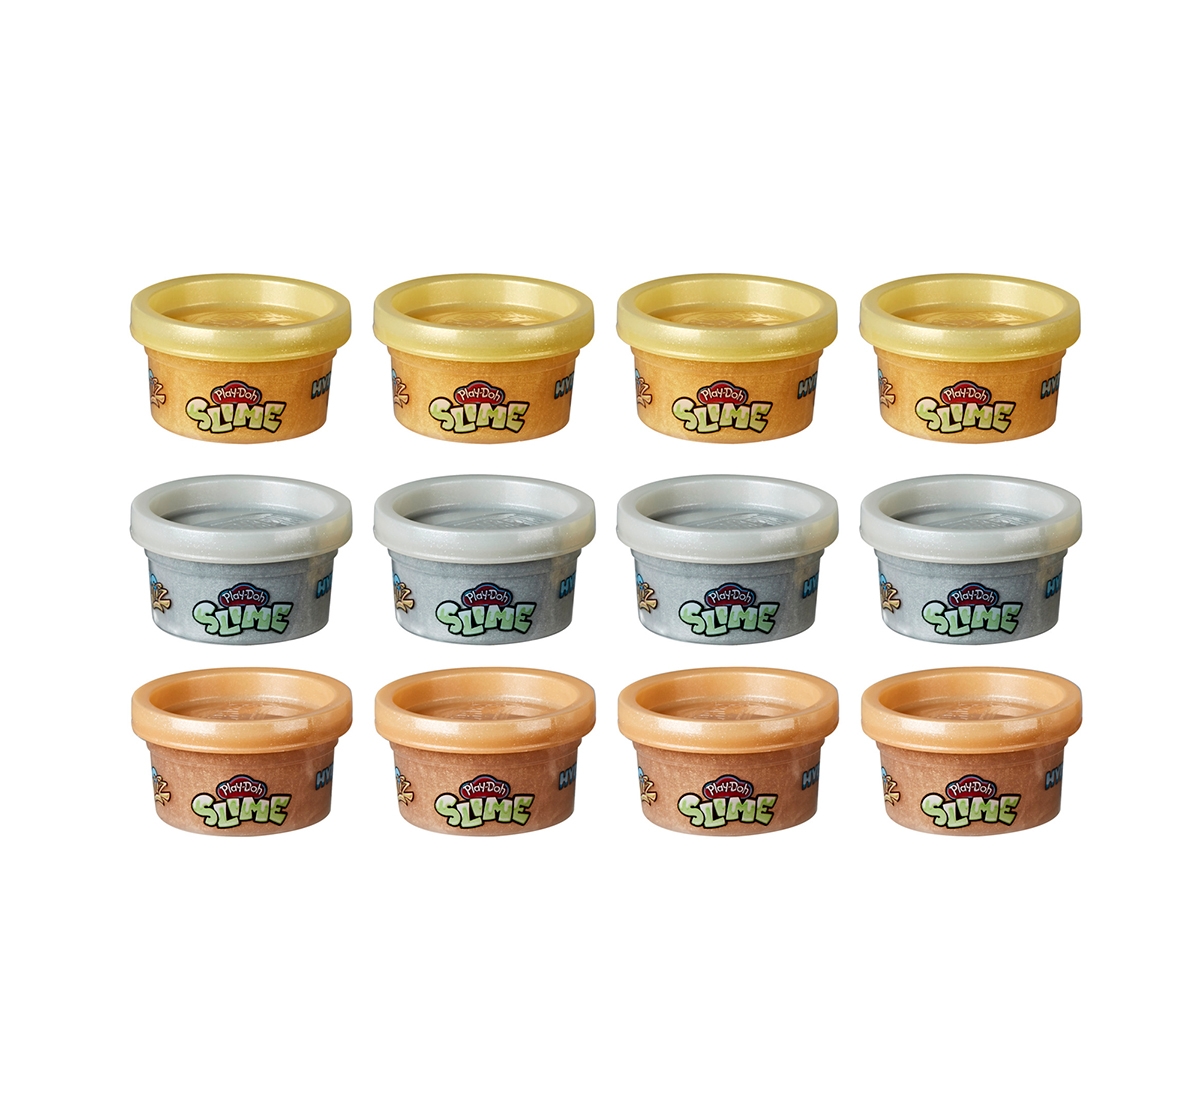 Play-Doh | Play-Doh Slime Gold Collection HydroGlitz Molten Treasure 12-Pack of Liquid Metal-Looking Gold, Silver, and Rose Gold Colors, Non-Toxic 1-Ounce Cans Sand, Slime & Others for Kids age 3Y+ 